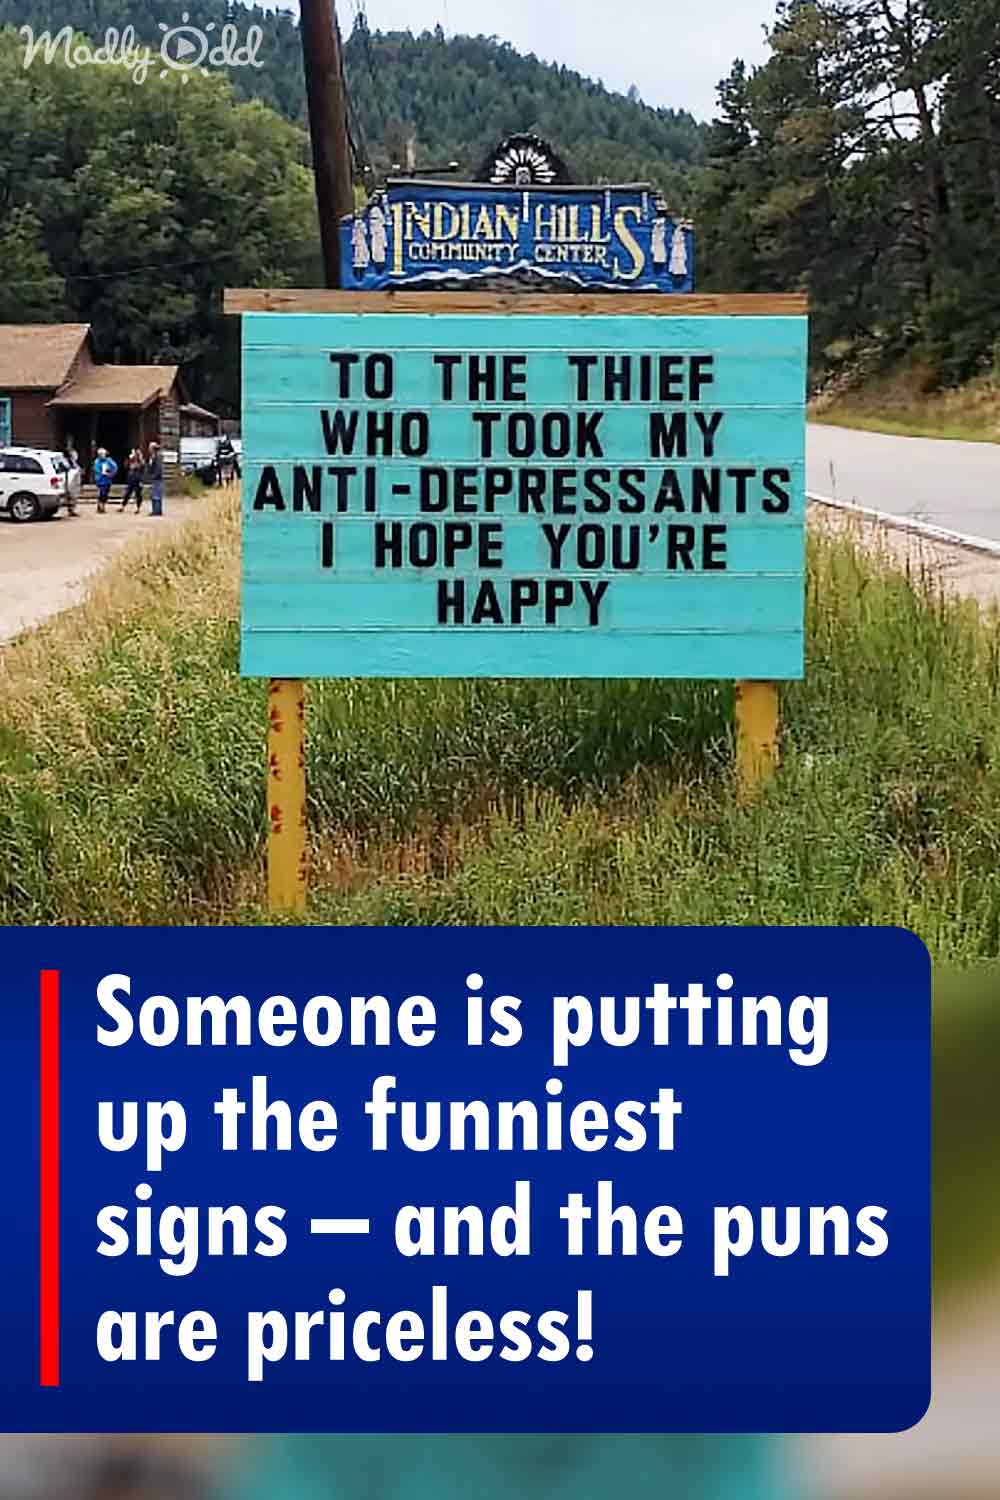 Someone is putting up the funniest signs – and the puns are priceless!